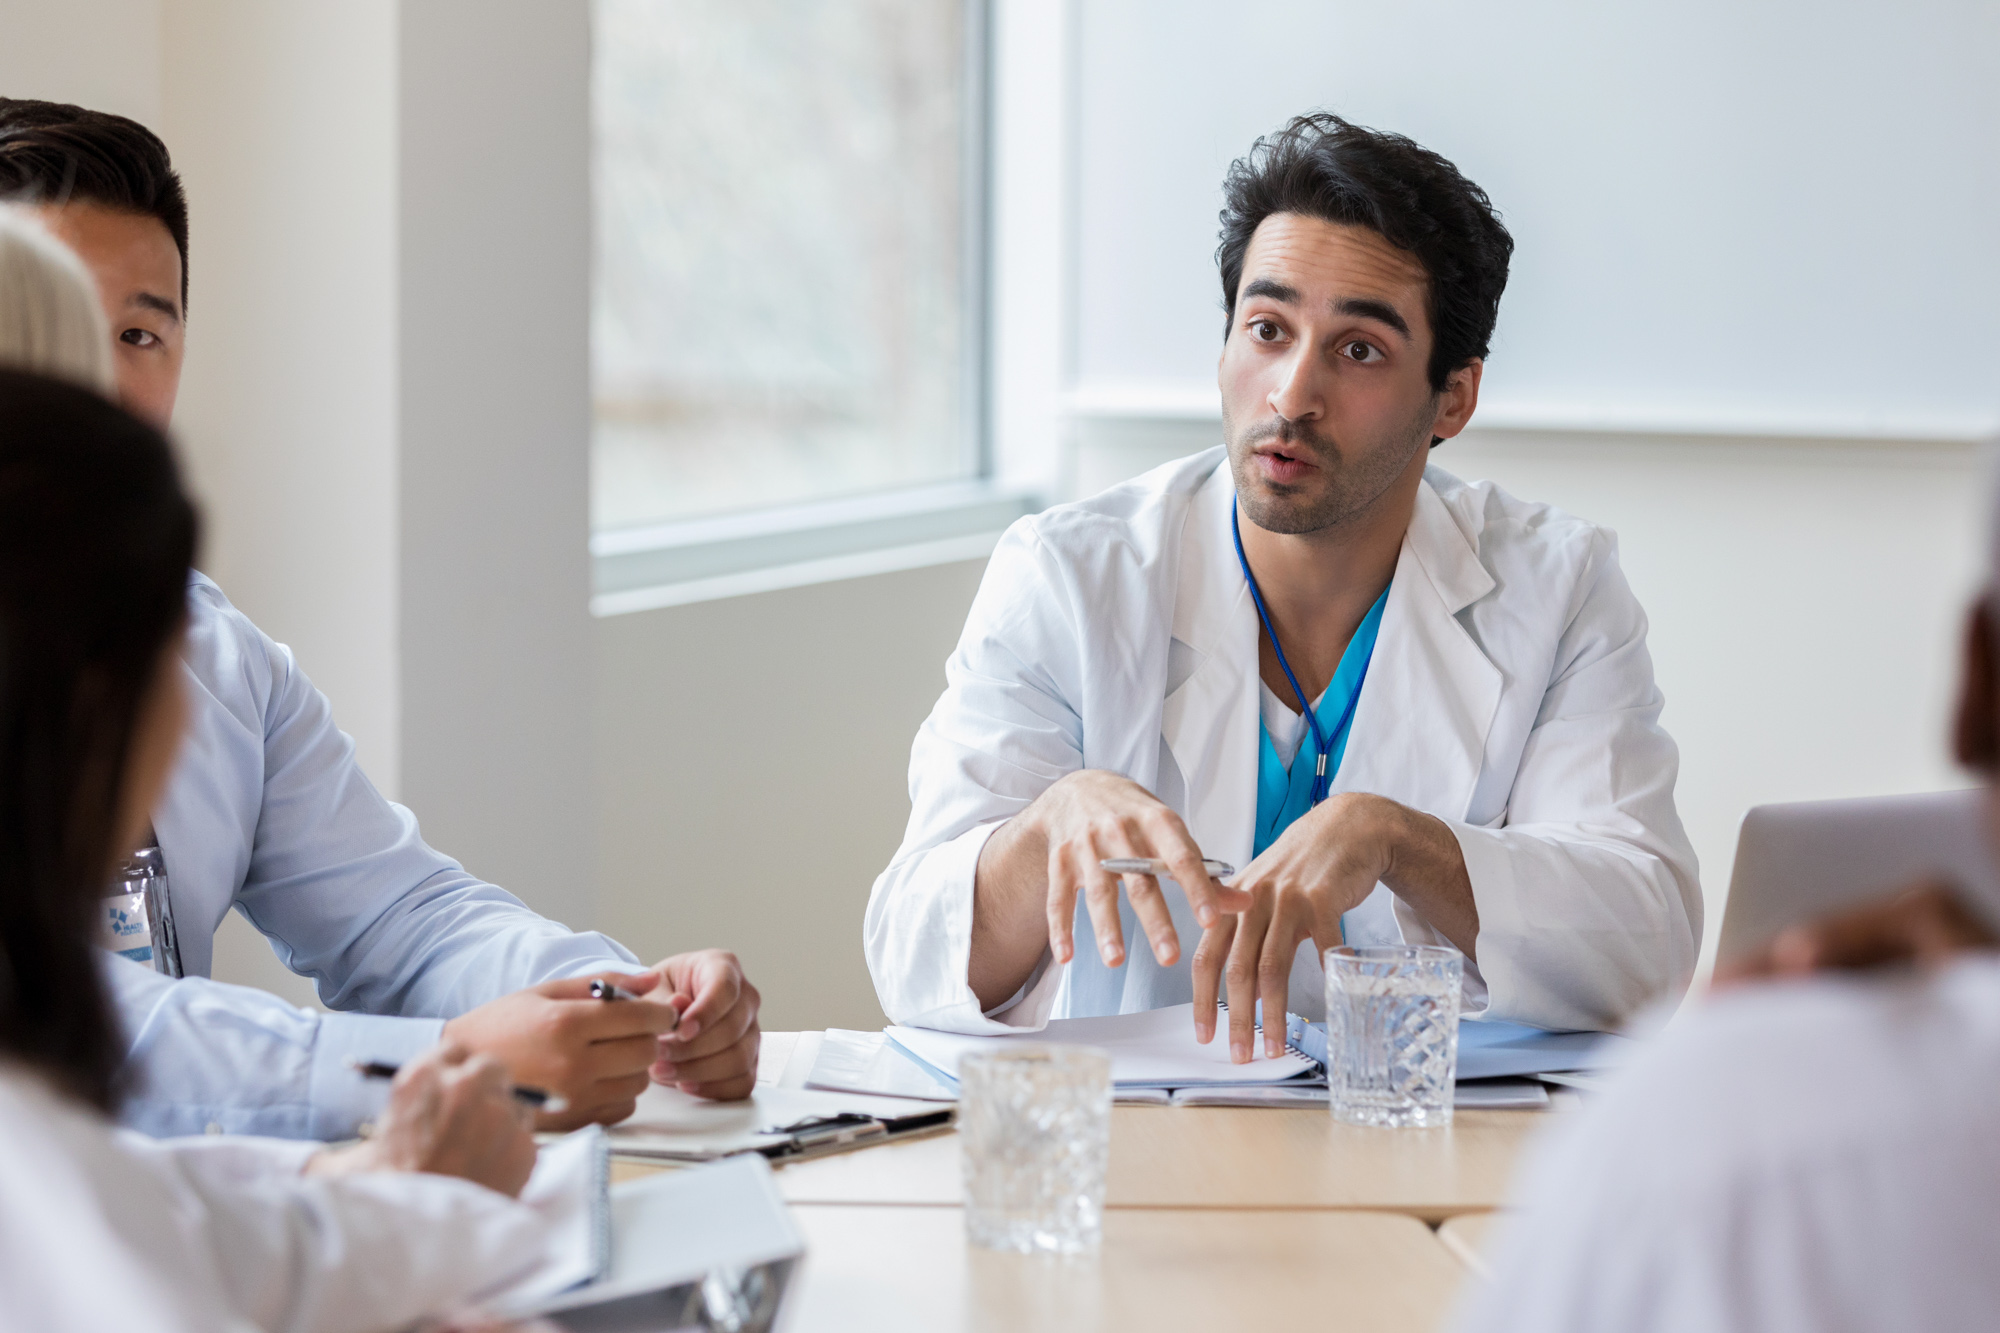 Handsome male doctor has serious look while conversing with other doctors at a conference table